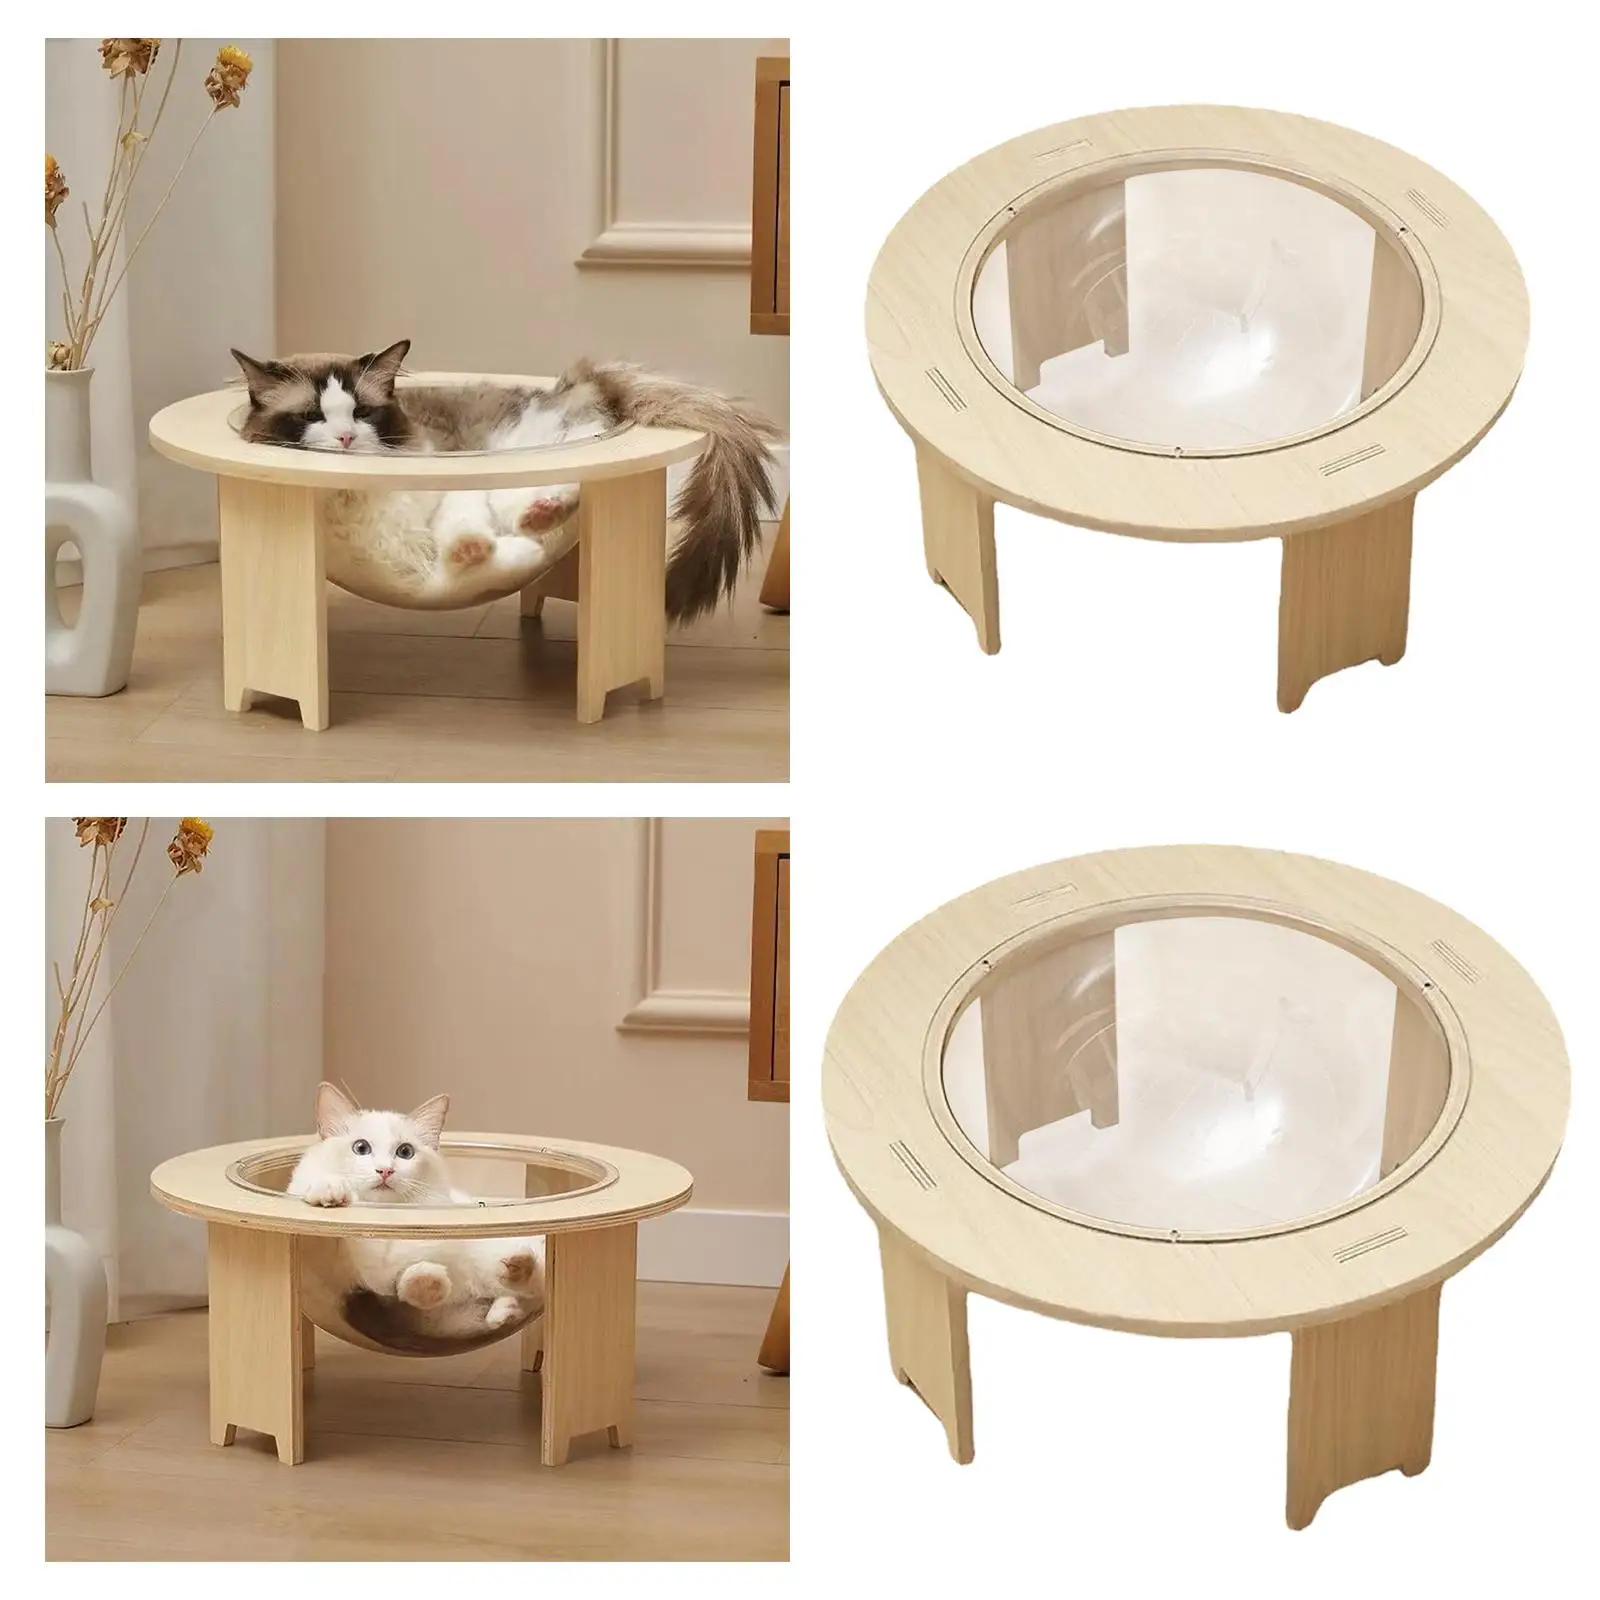 Space Capsule Cat Bed Indoor Cats Pet Accessories Kitty Activity Center